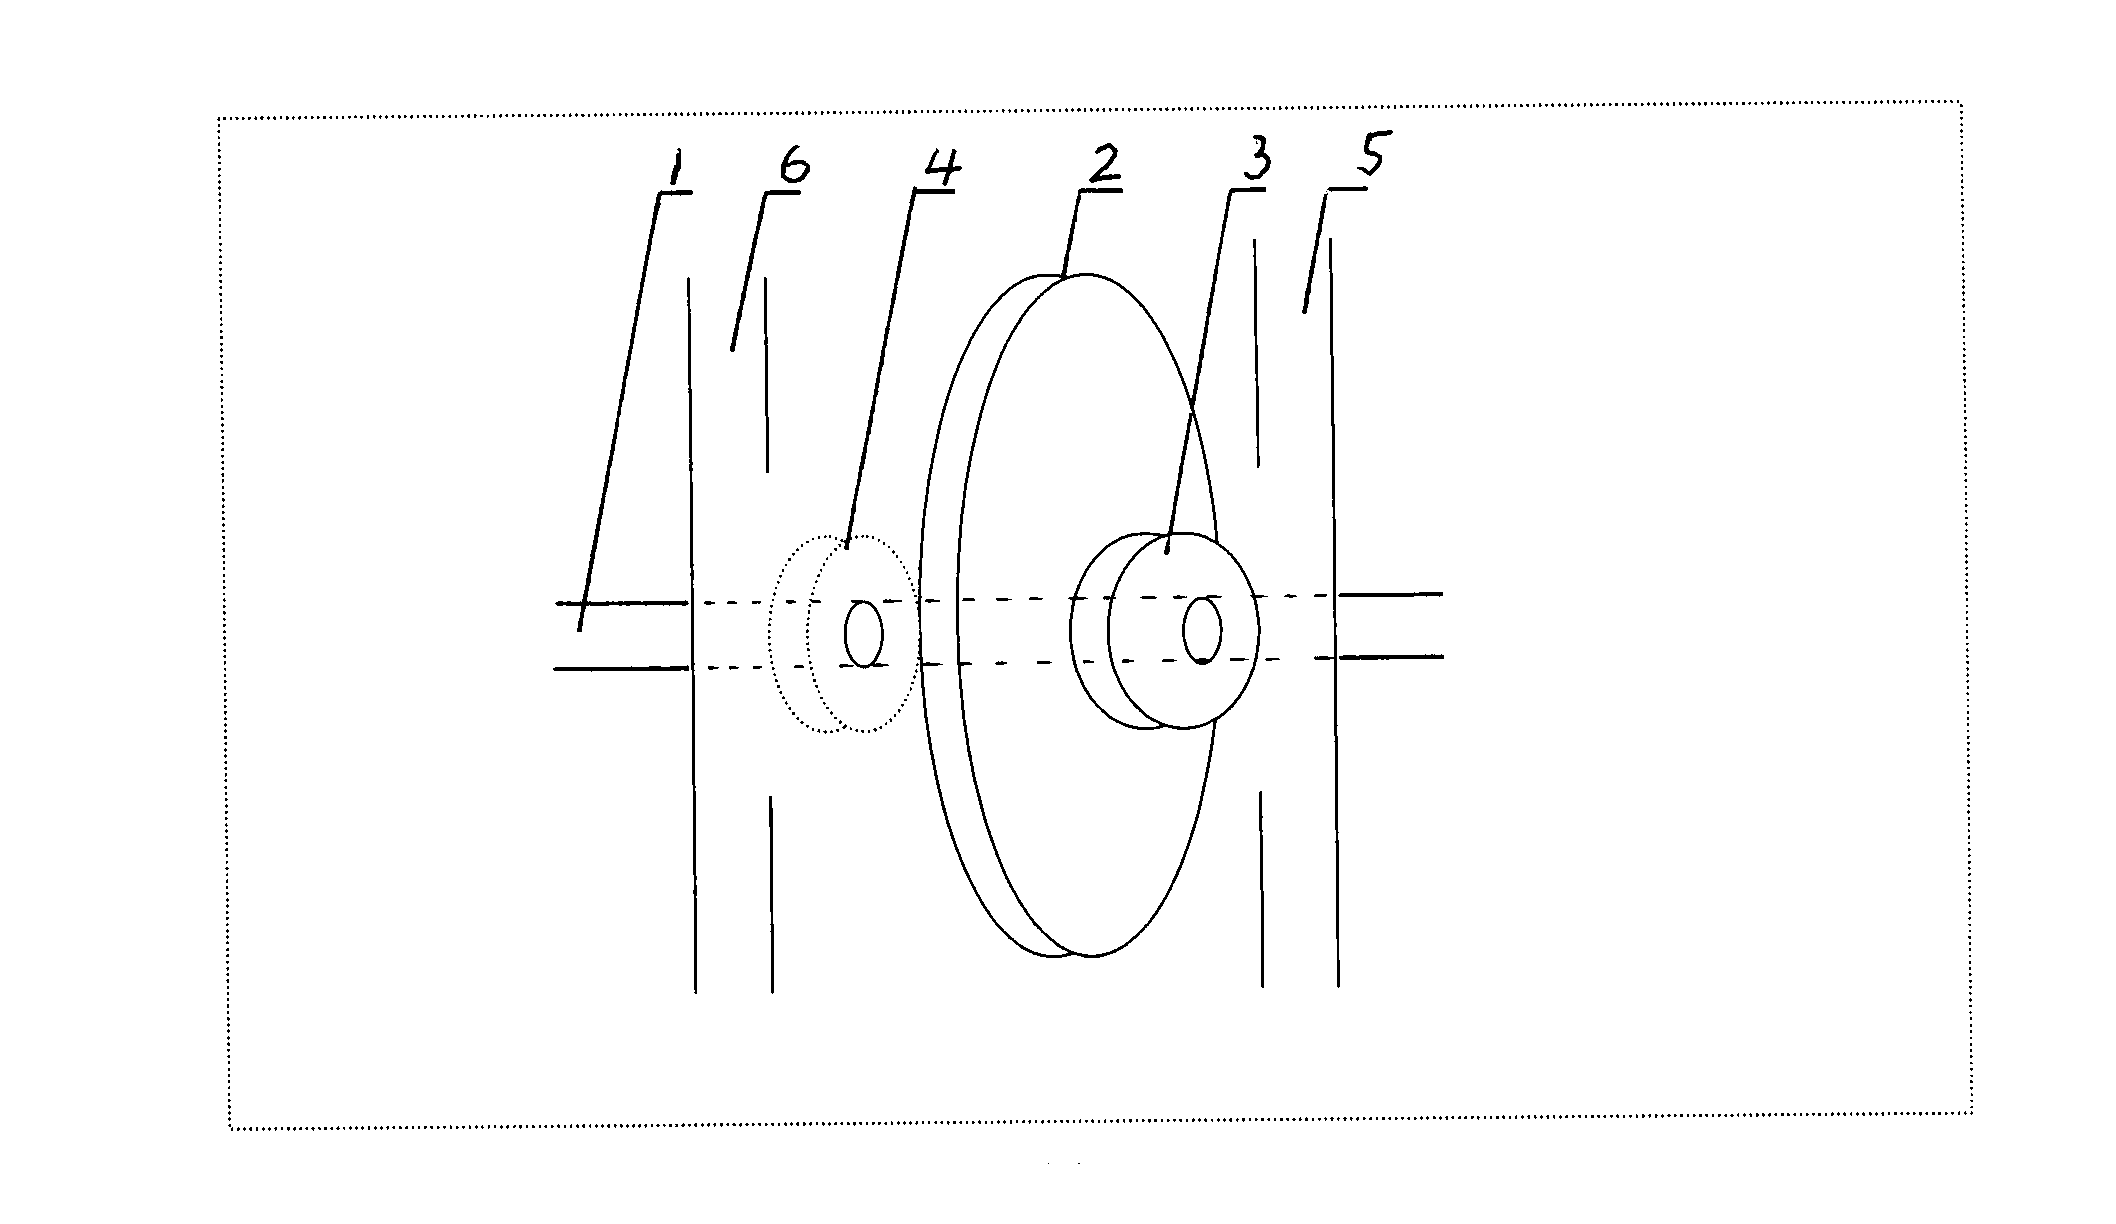 Self-generating power device for electric vehicles